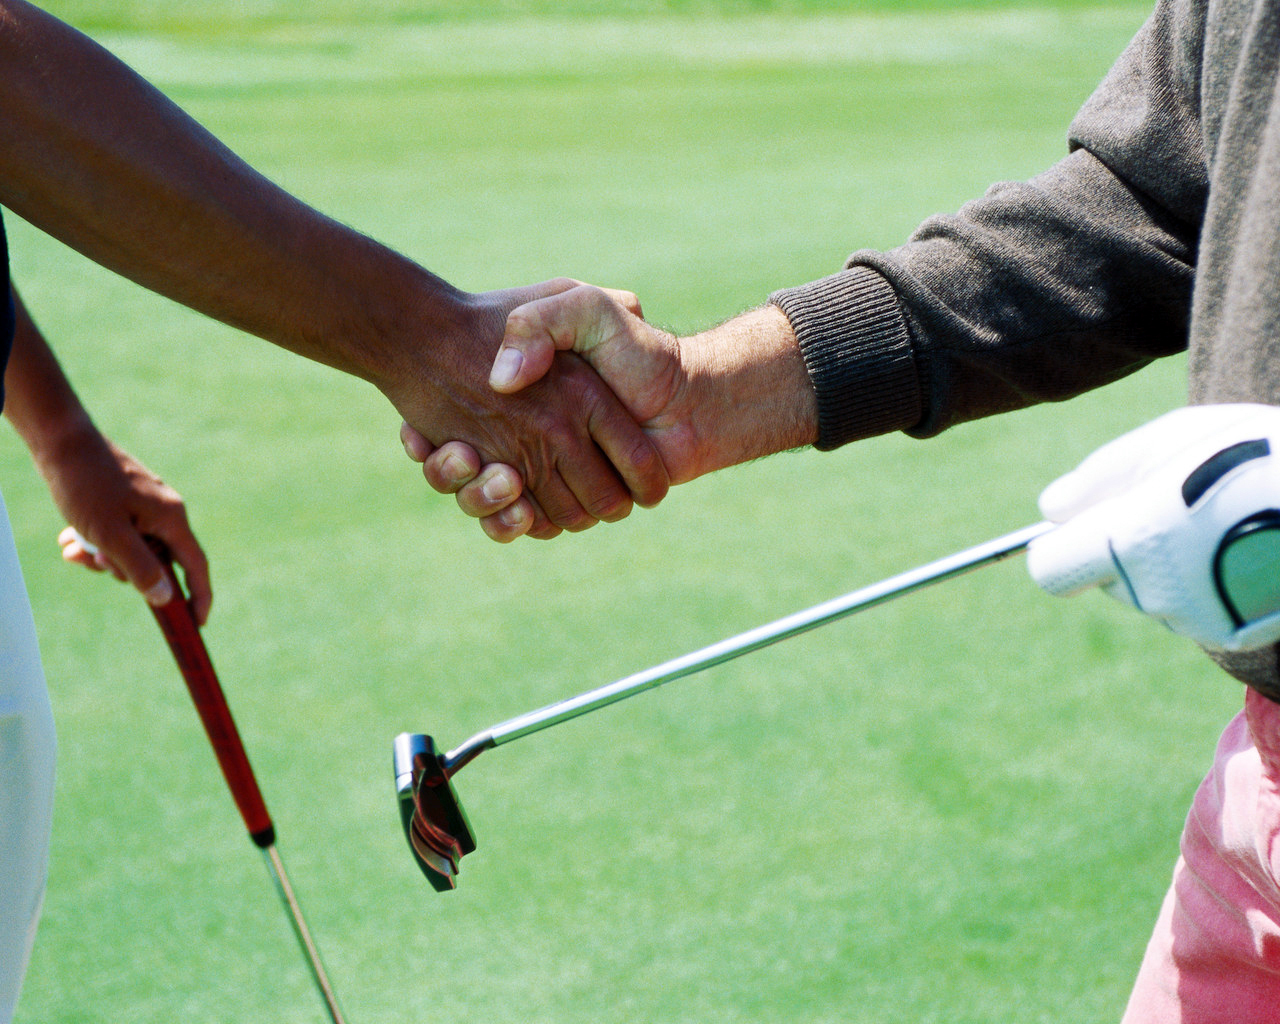 Golfers shaking hands after round